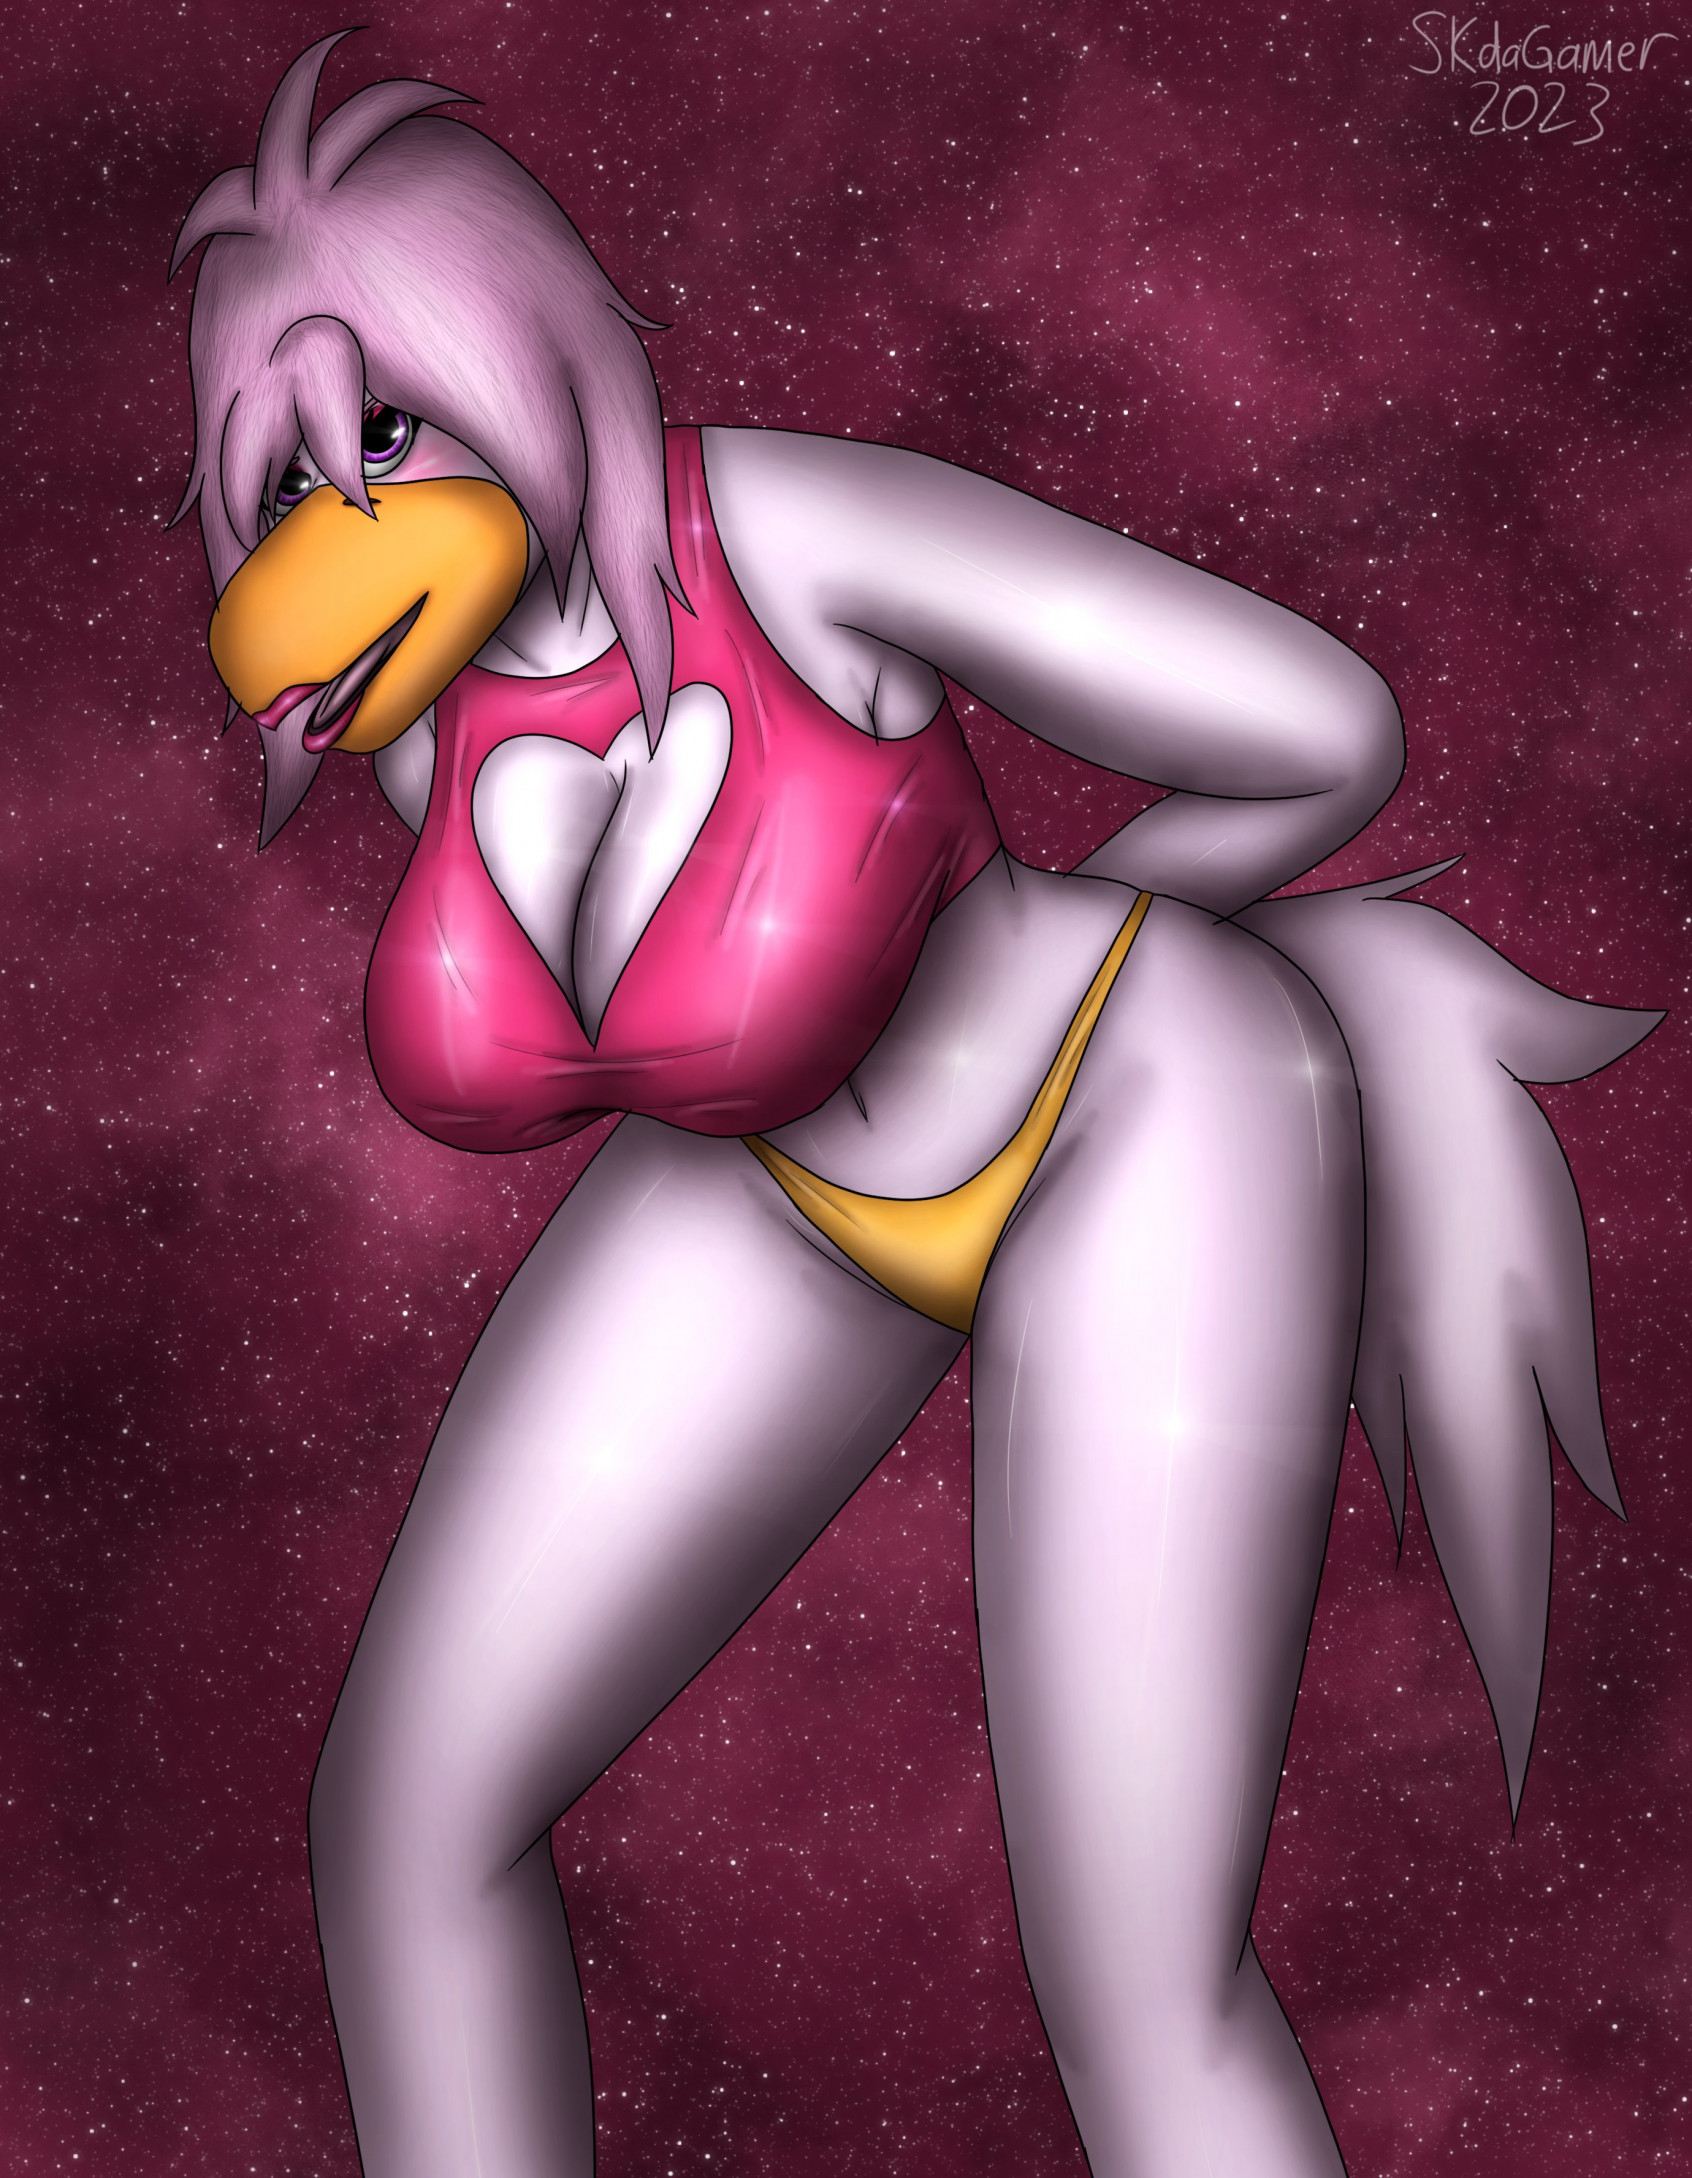 Funtime chica by MikeschmidtX -- Fur Affinity [dot] net